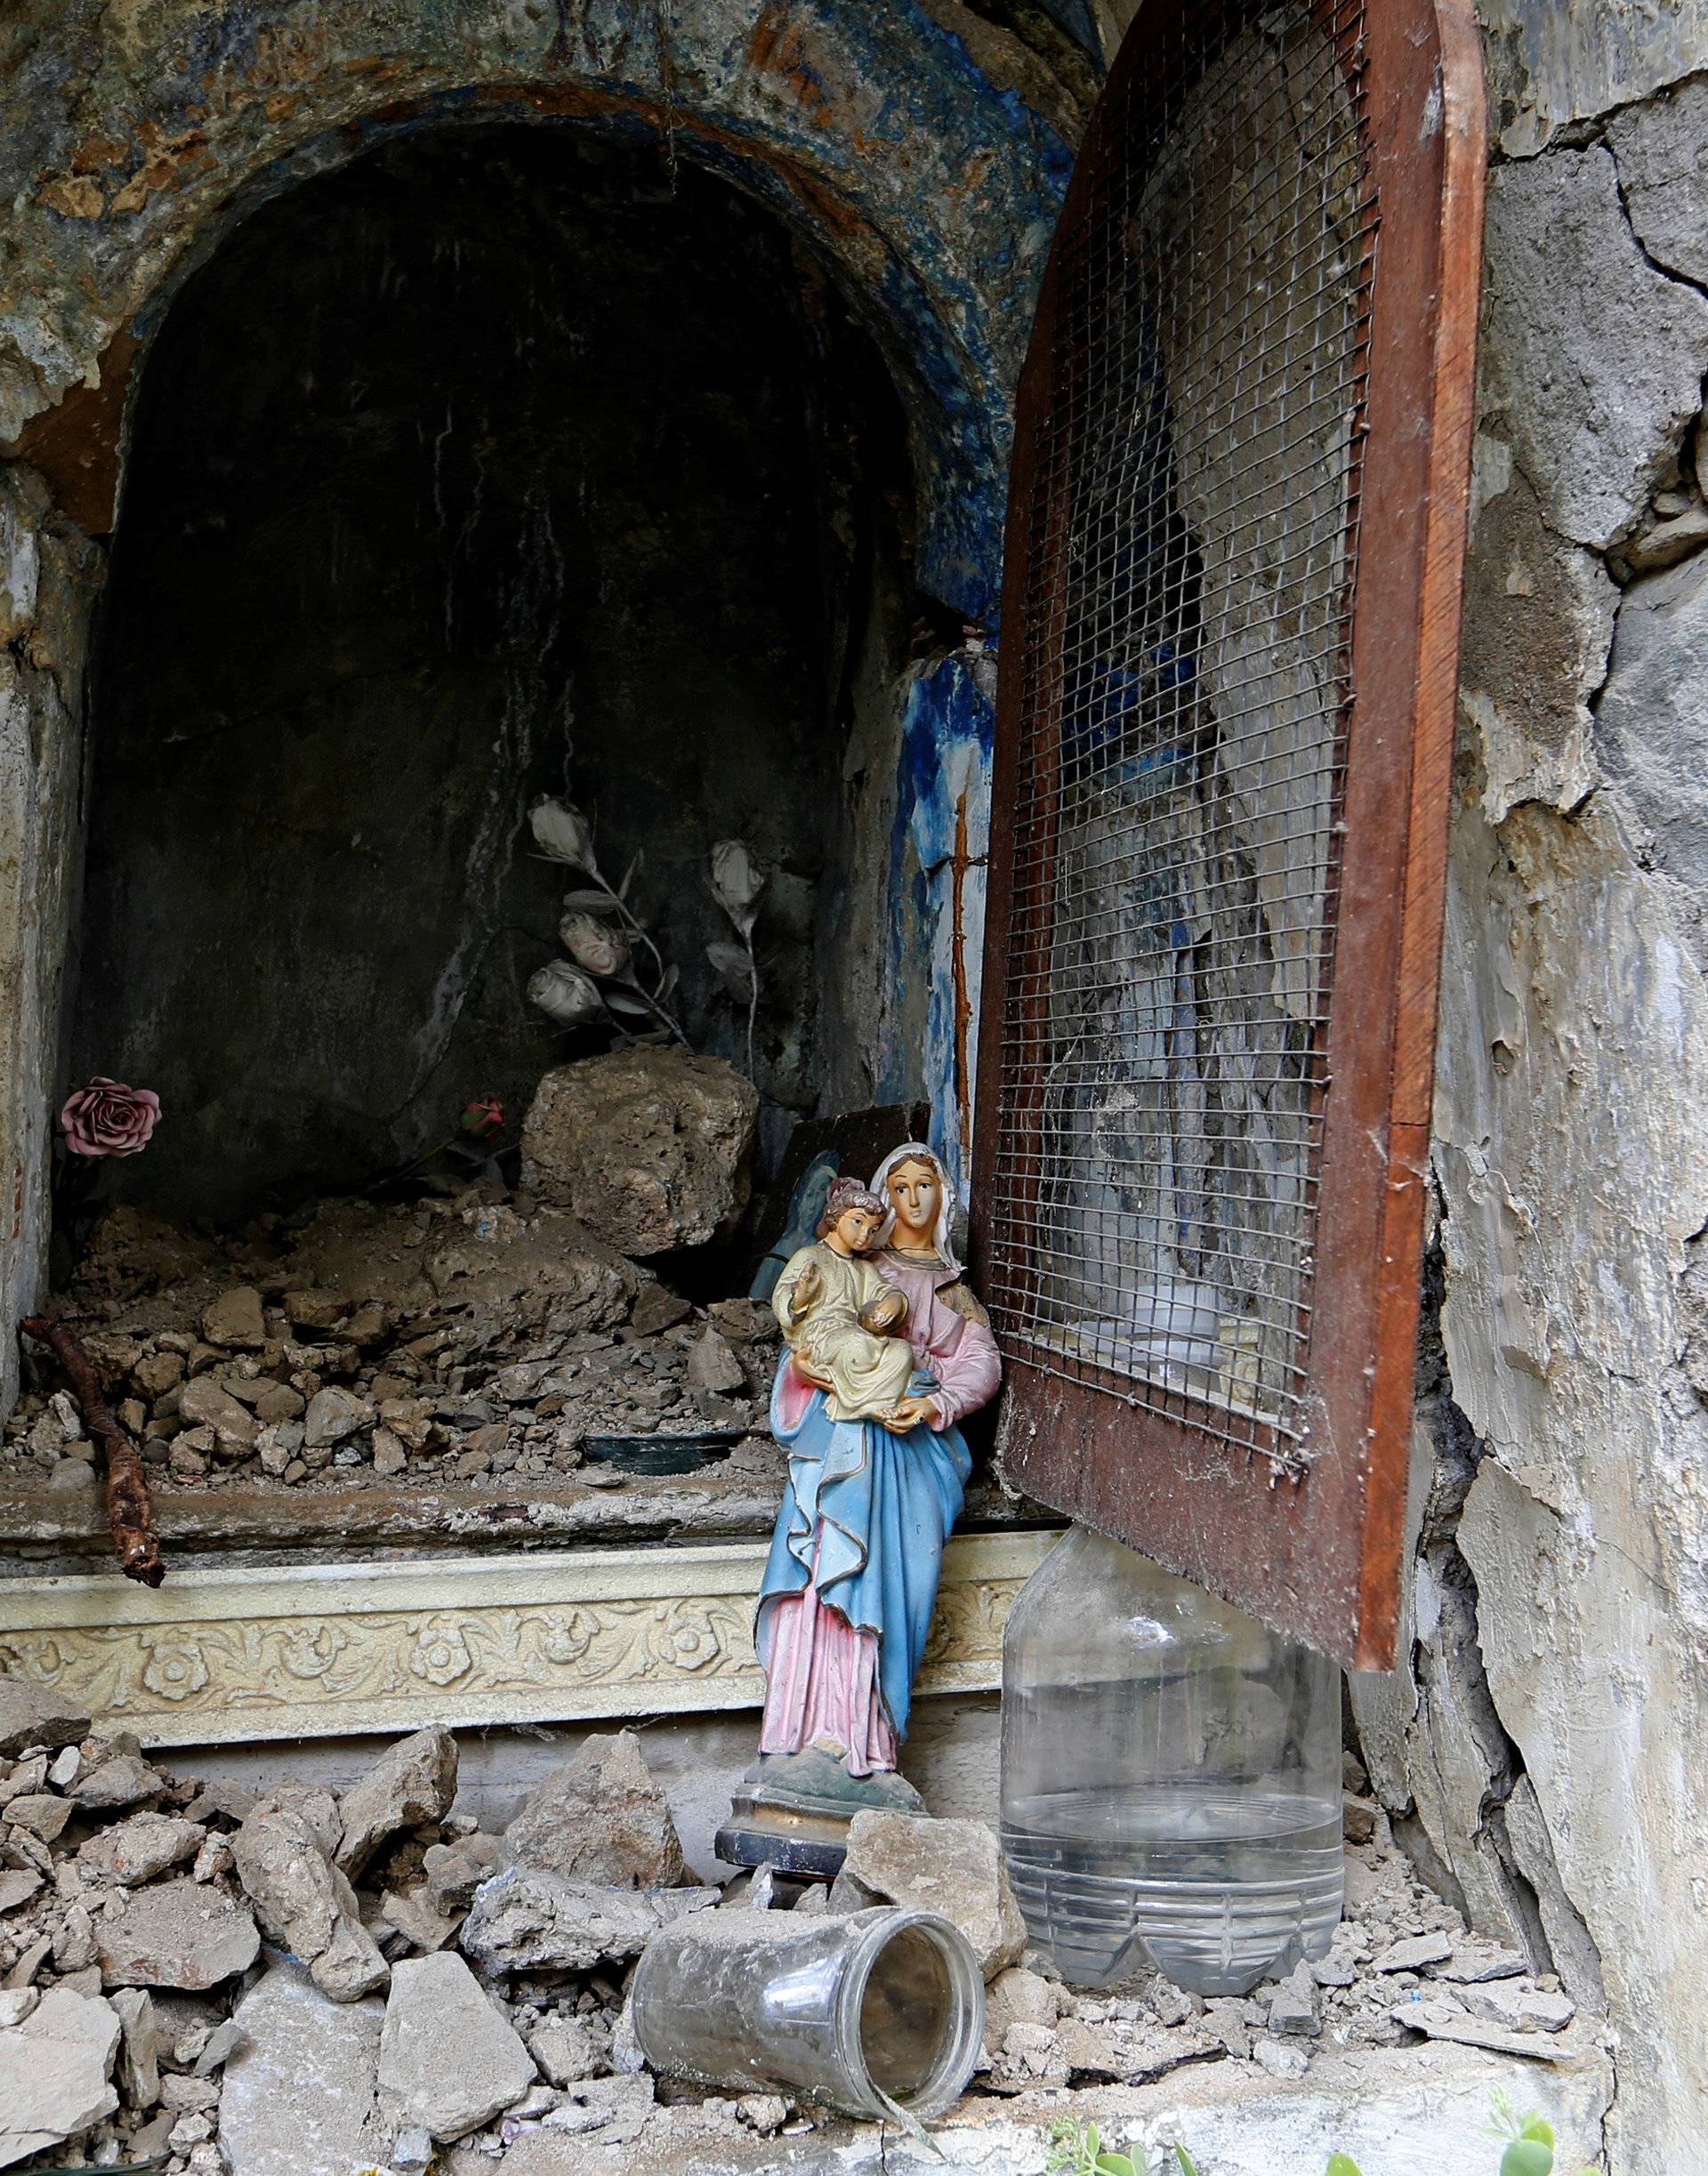 A statue of the Virgin Lady stands outside a destroyed niche following an earthquake at Pescara del Tronto